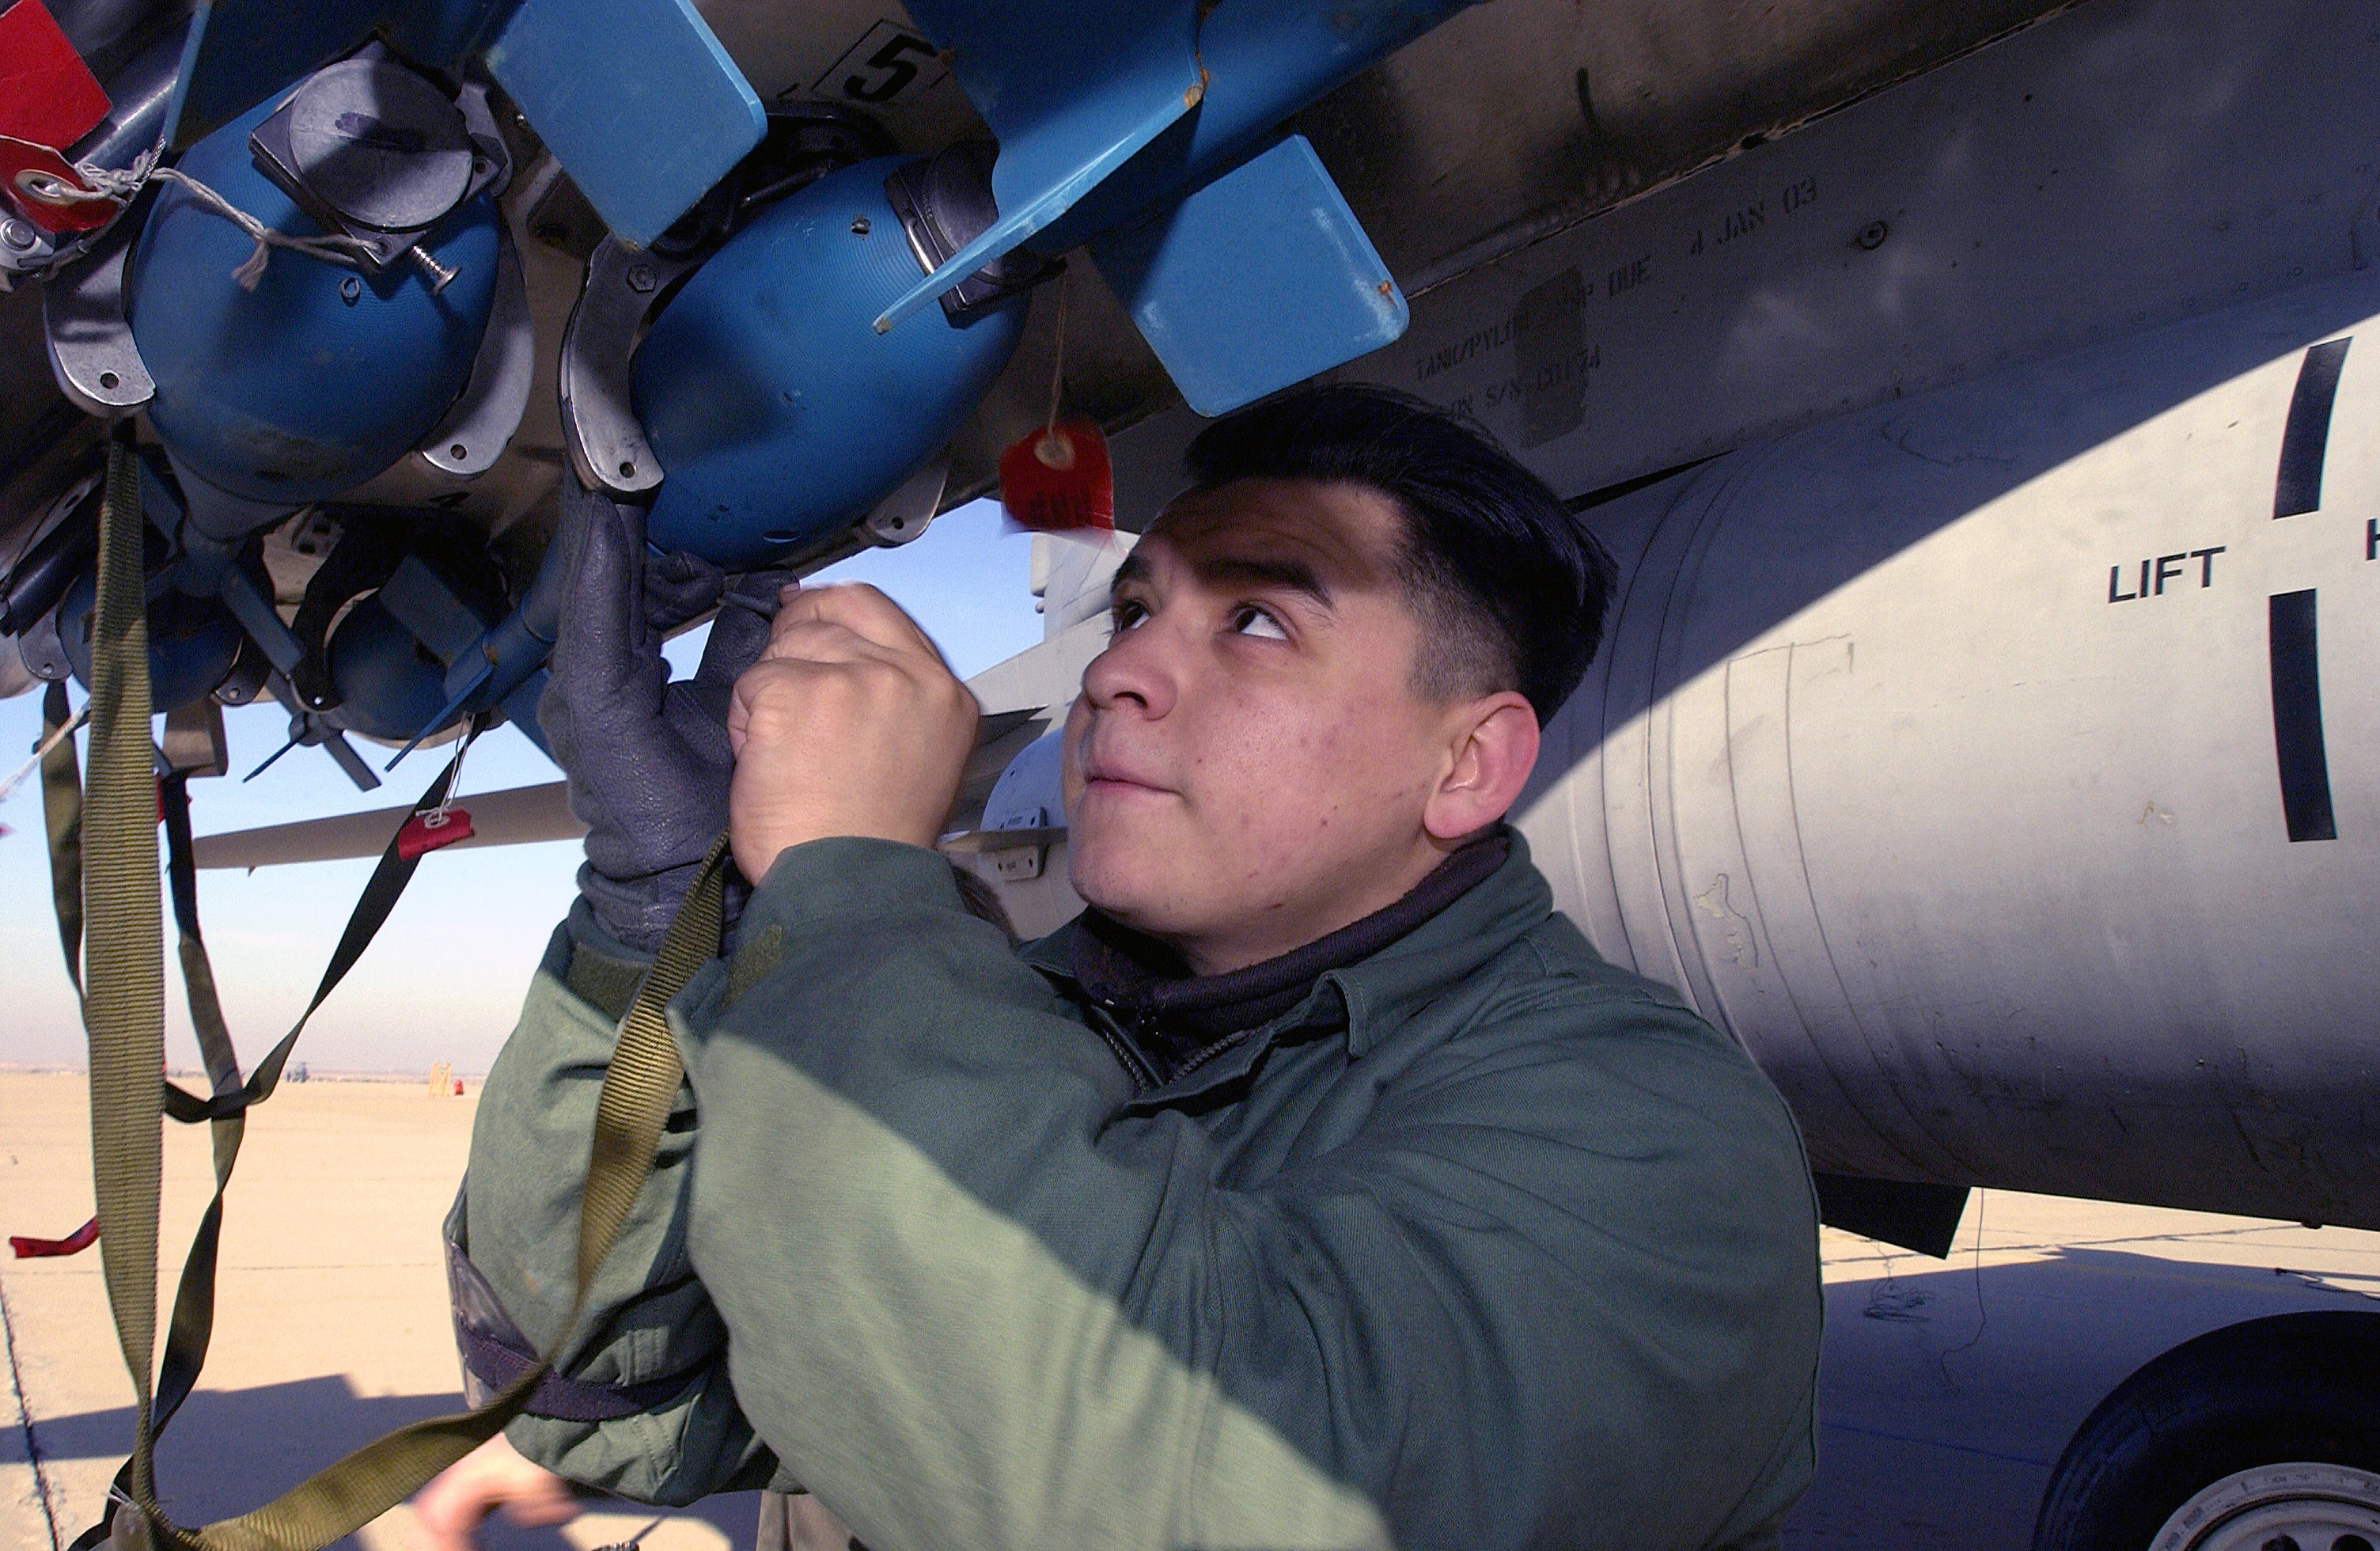 universitetsområde fordampning Microbe File:US Air Force (USAF) SENIOR AIRMAN (SAR) Joe Champion, Armament  Delivery SPECIALIST, 510th Fighter Squadron, uploads BDU-33 practice bombs  onto a USAF F-16 Fighting Falcon aircraft, - DPLA -  ece41df112010a5cdfd07ab6673bbf9c.jpeg - Wikimedia